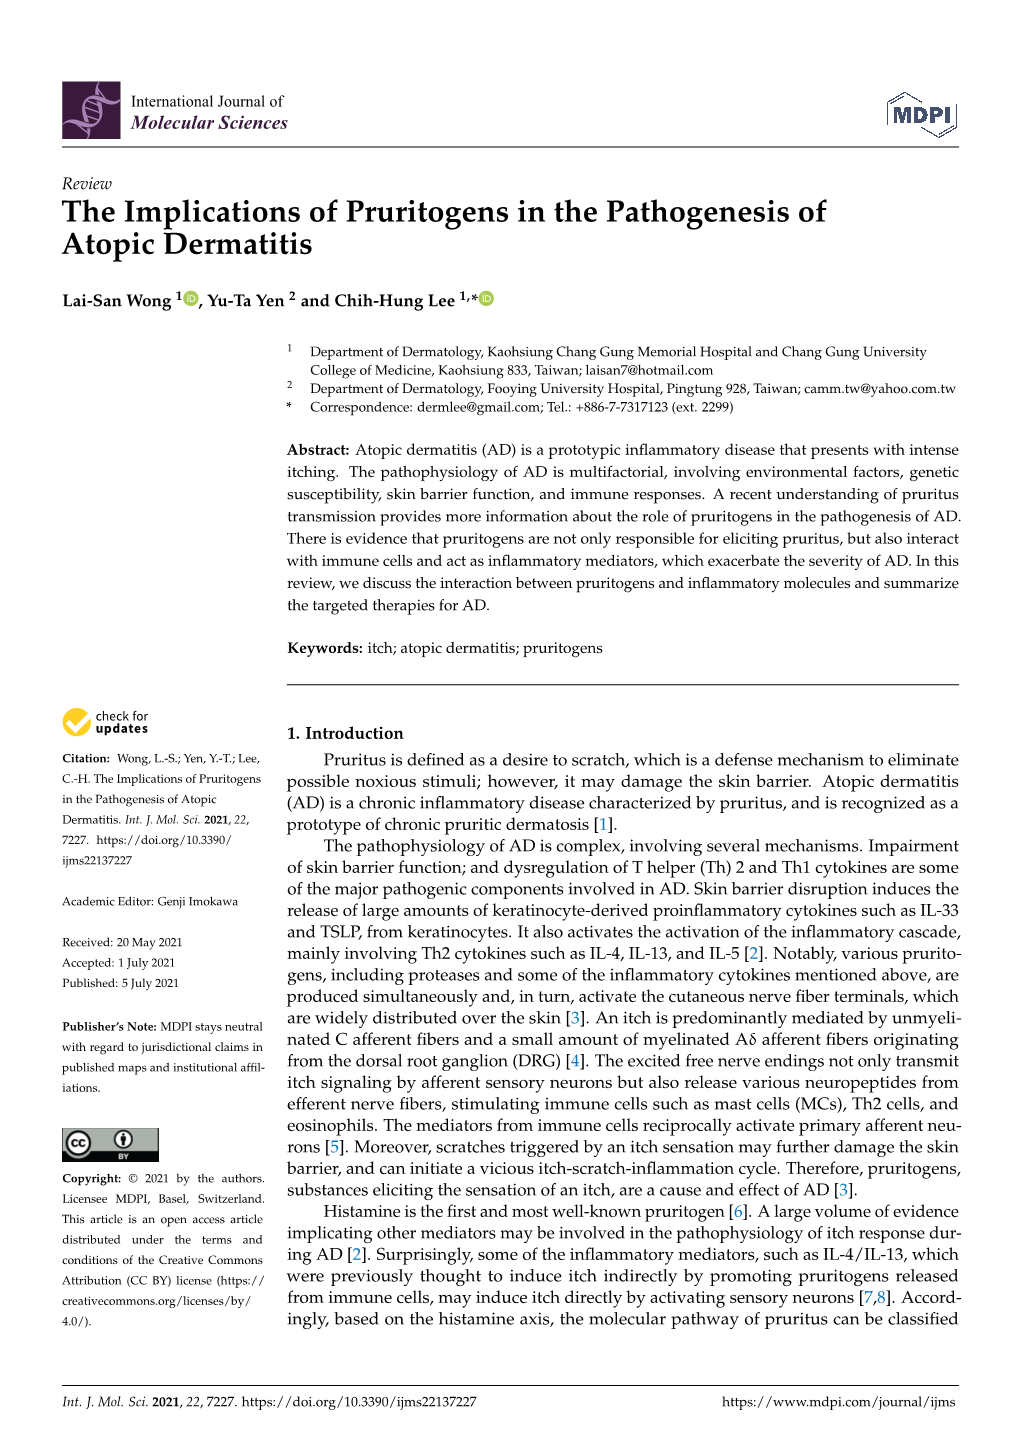 The Implications of Pruritogens in the Pathogenesis of Atopic Dermatitis